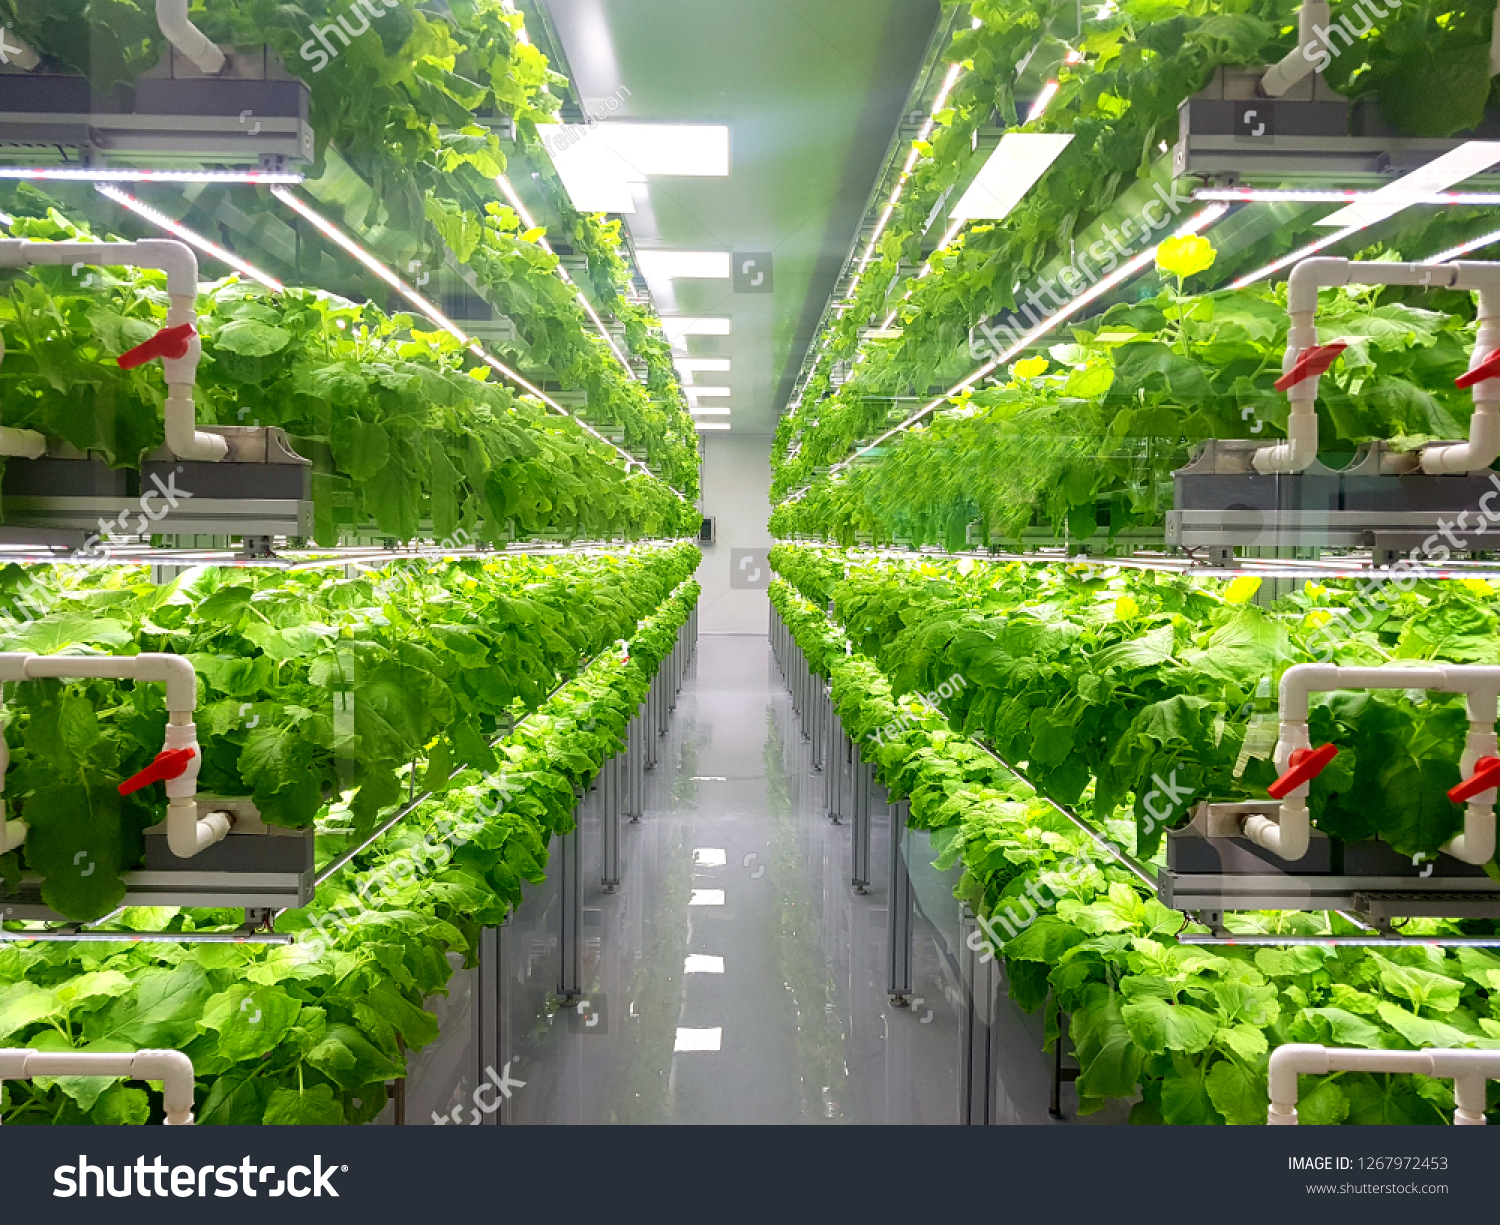 Plant vertical farms producing plant vaccines #1267972453